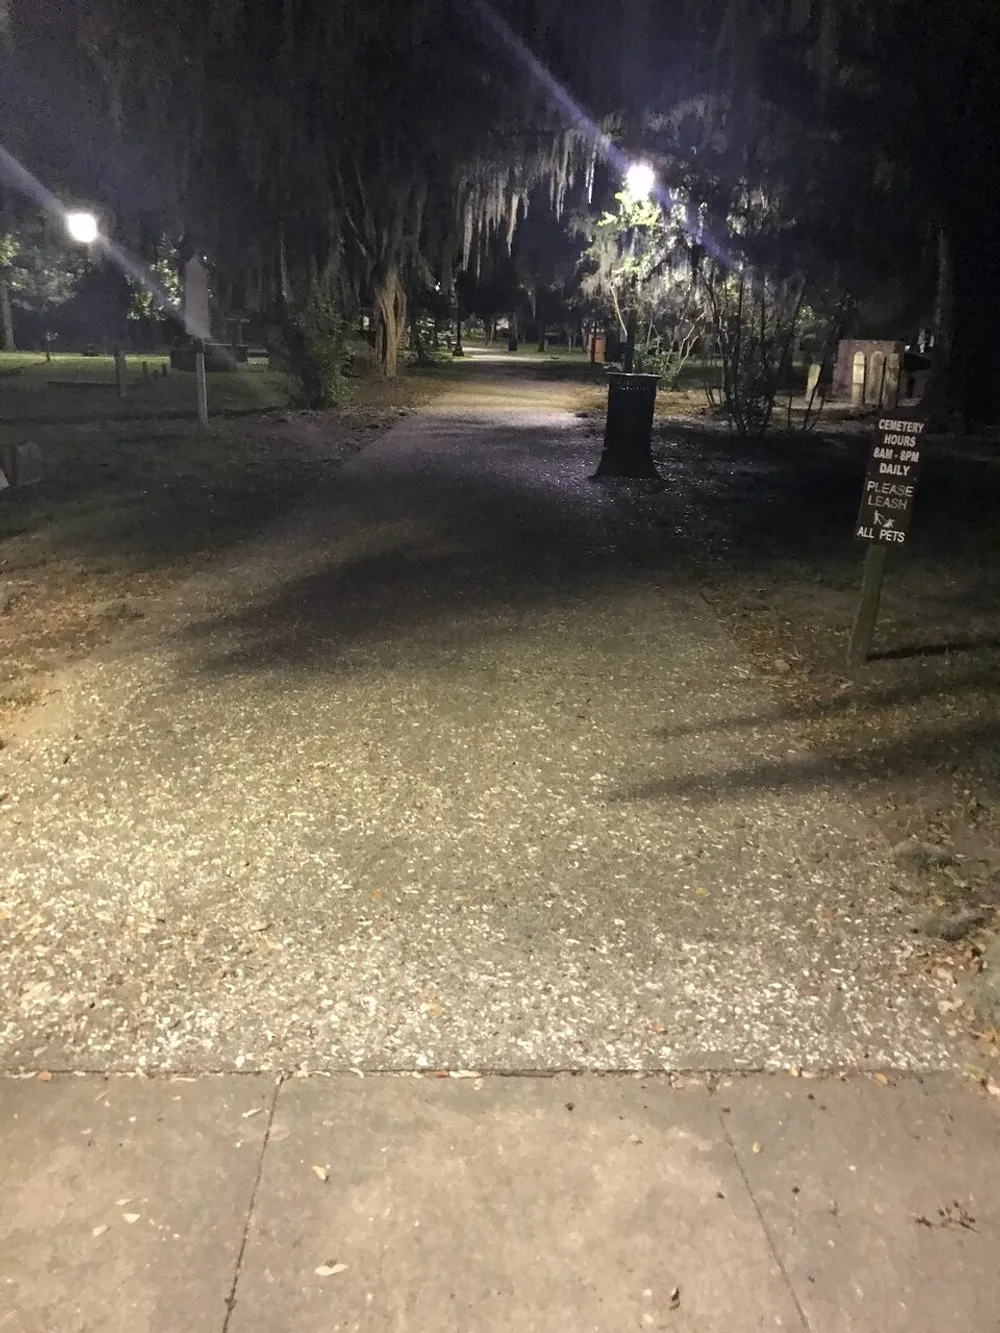 This image shows a lit pathway leading into a cemetery at night with moss-draped trees and a sign indicating cemetery hours and a leash policy for pets